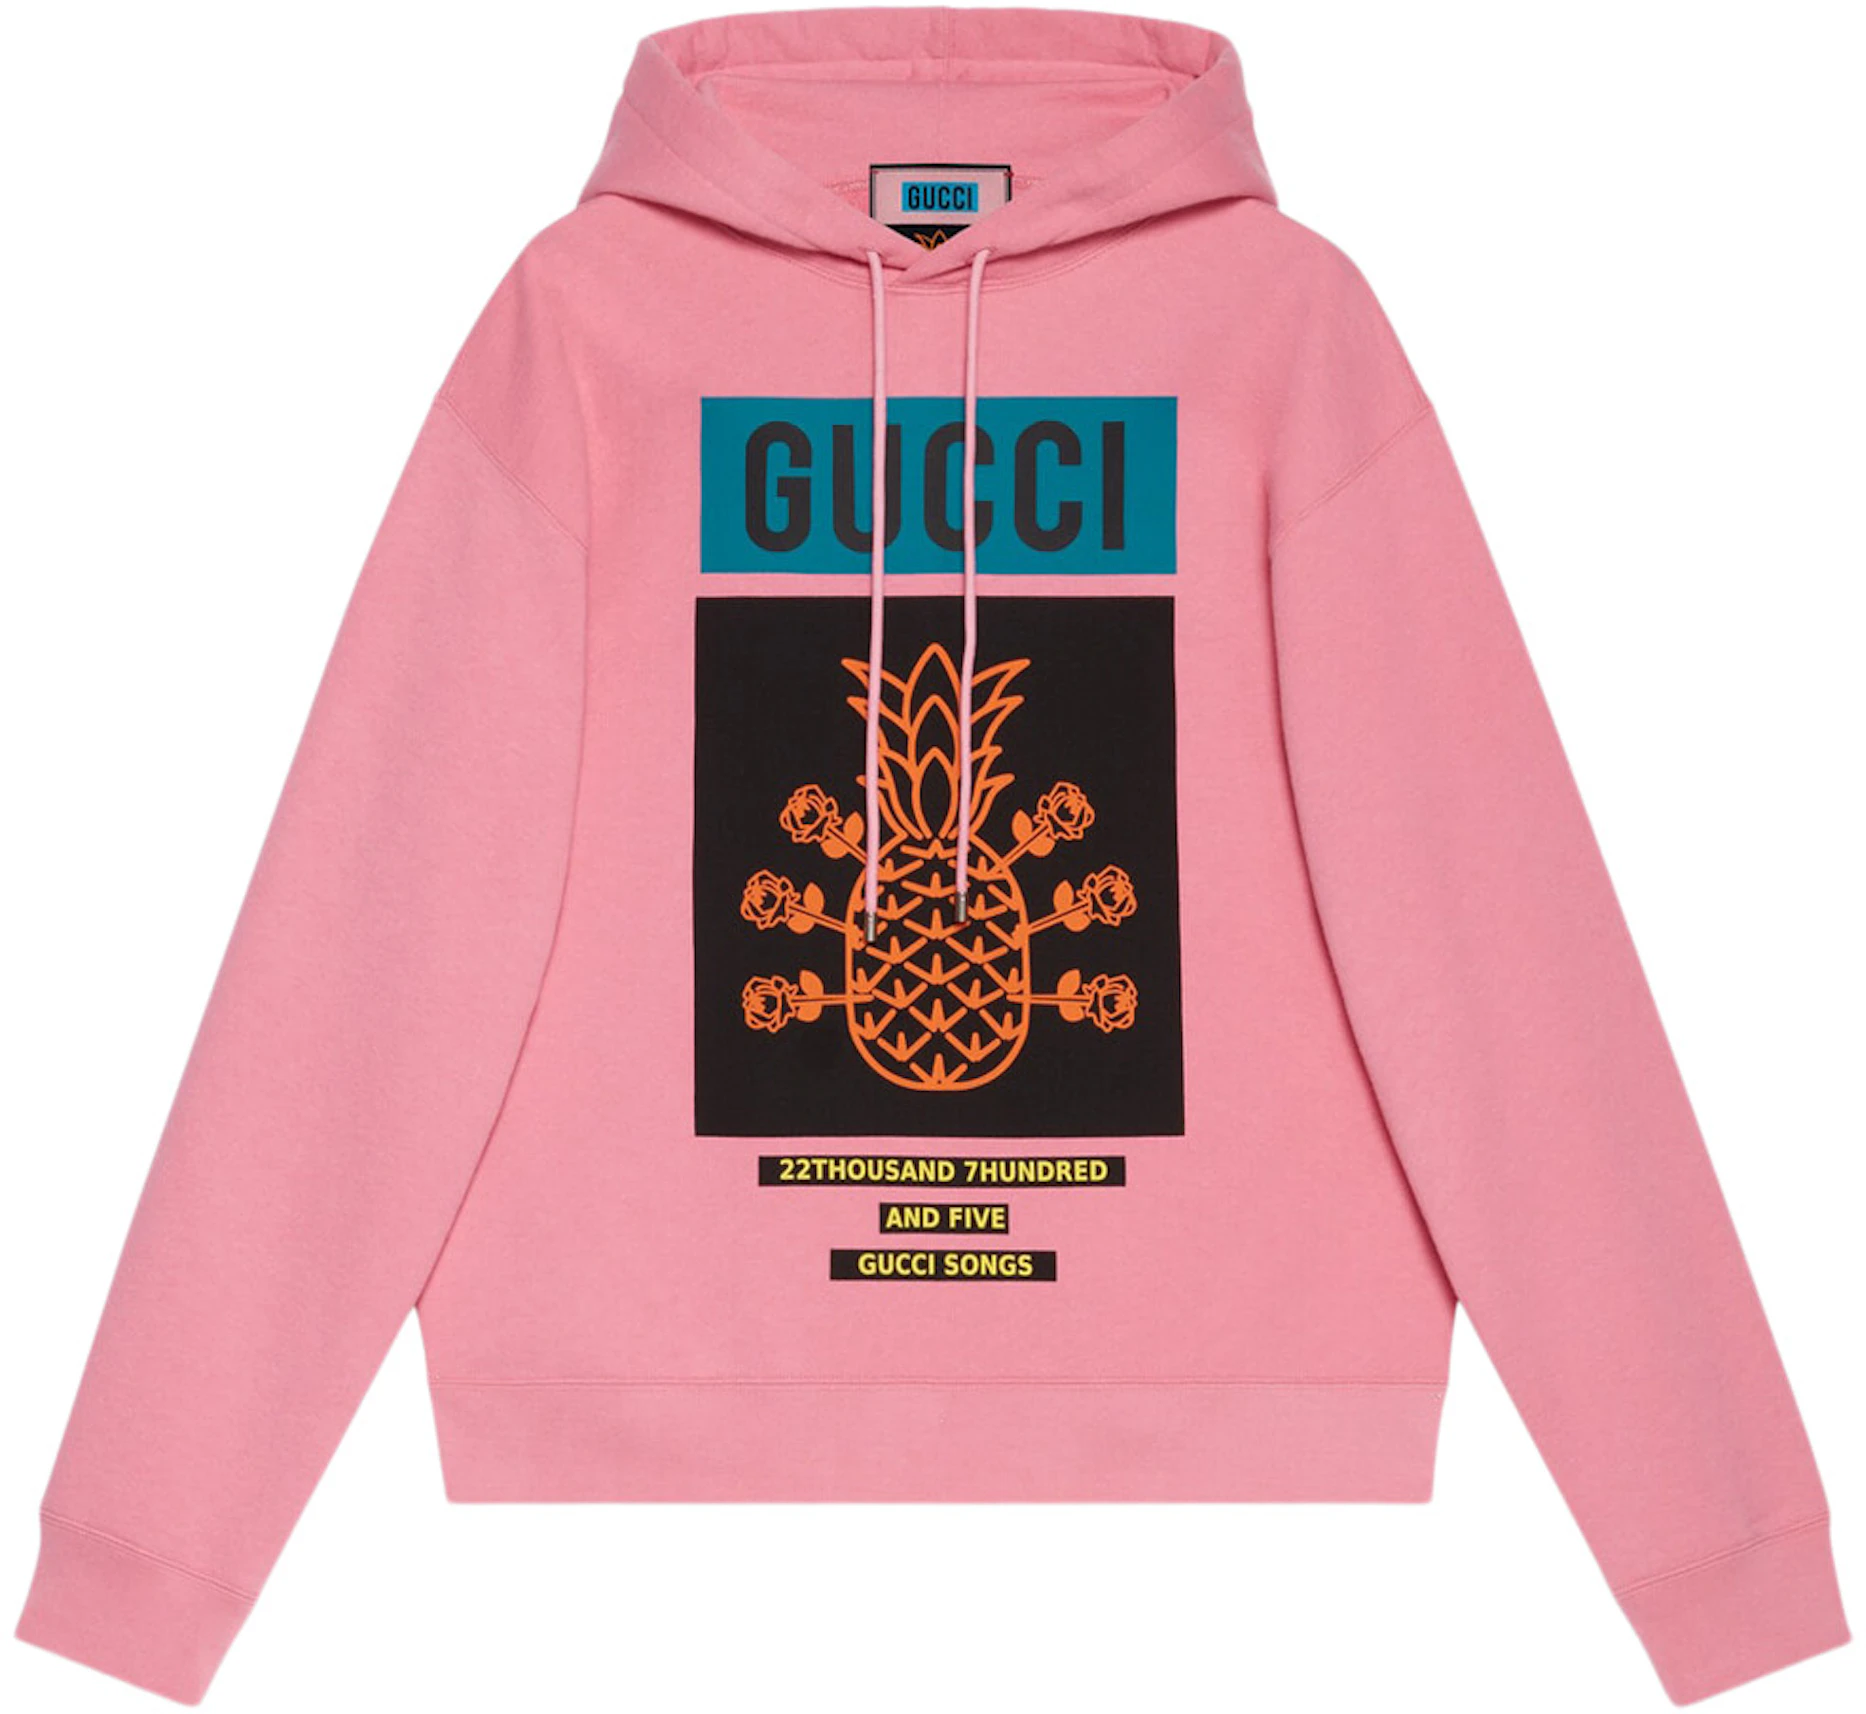 Gucci Pineapple Pullover Hoodie Light Pink/Multi - SS22 - US